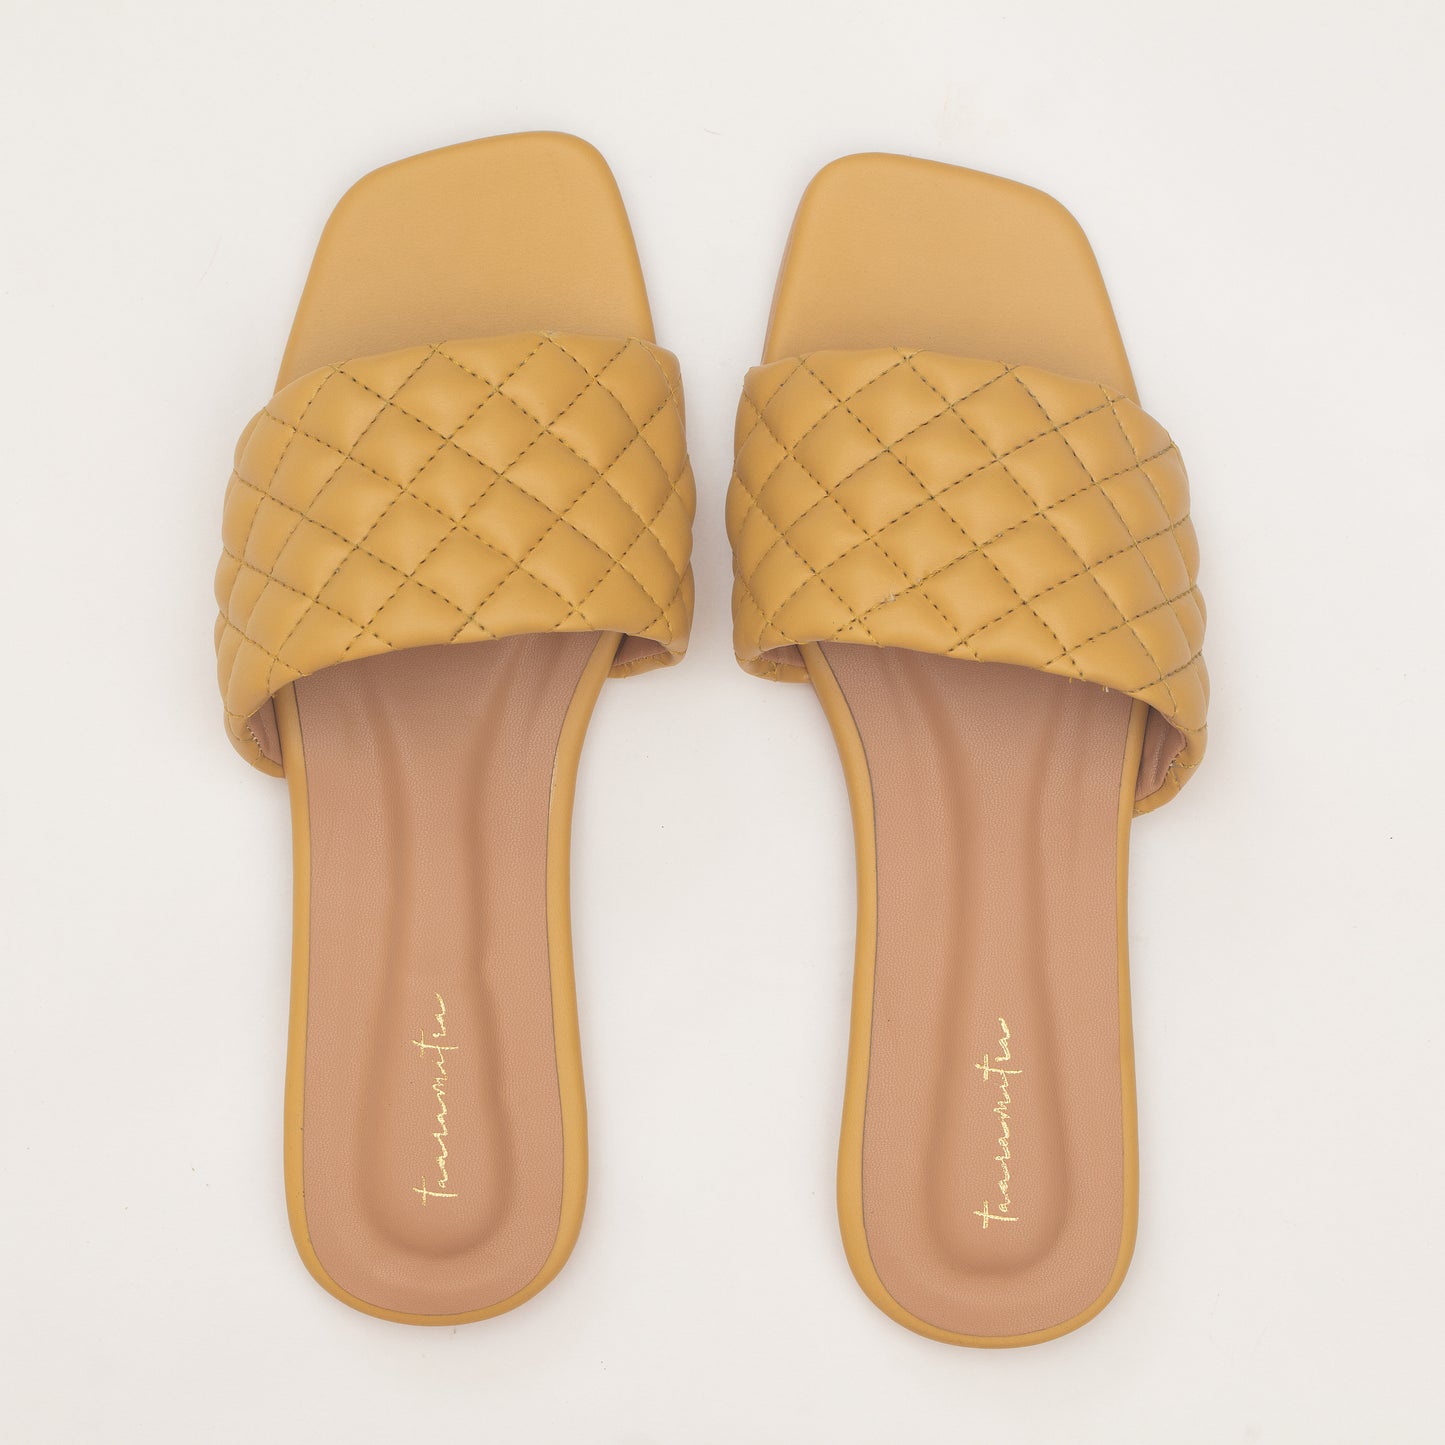 Quilted flats in Mustard